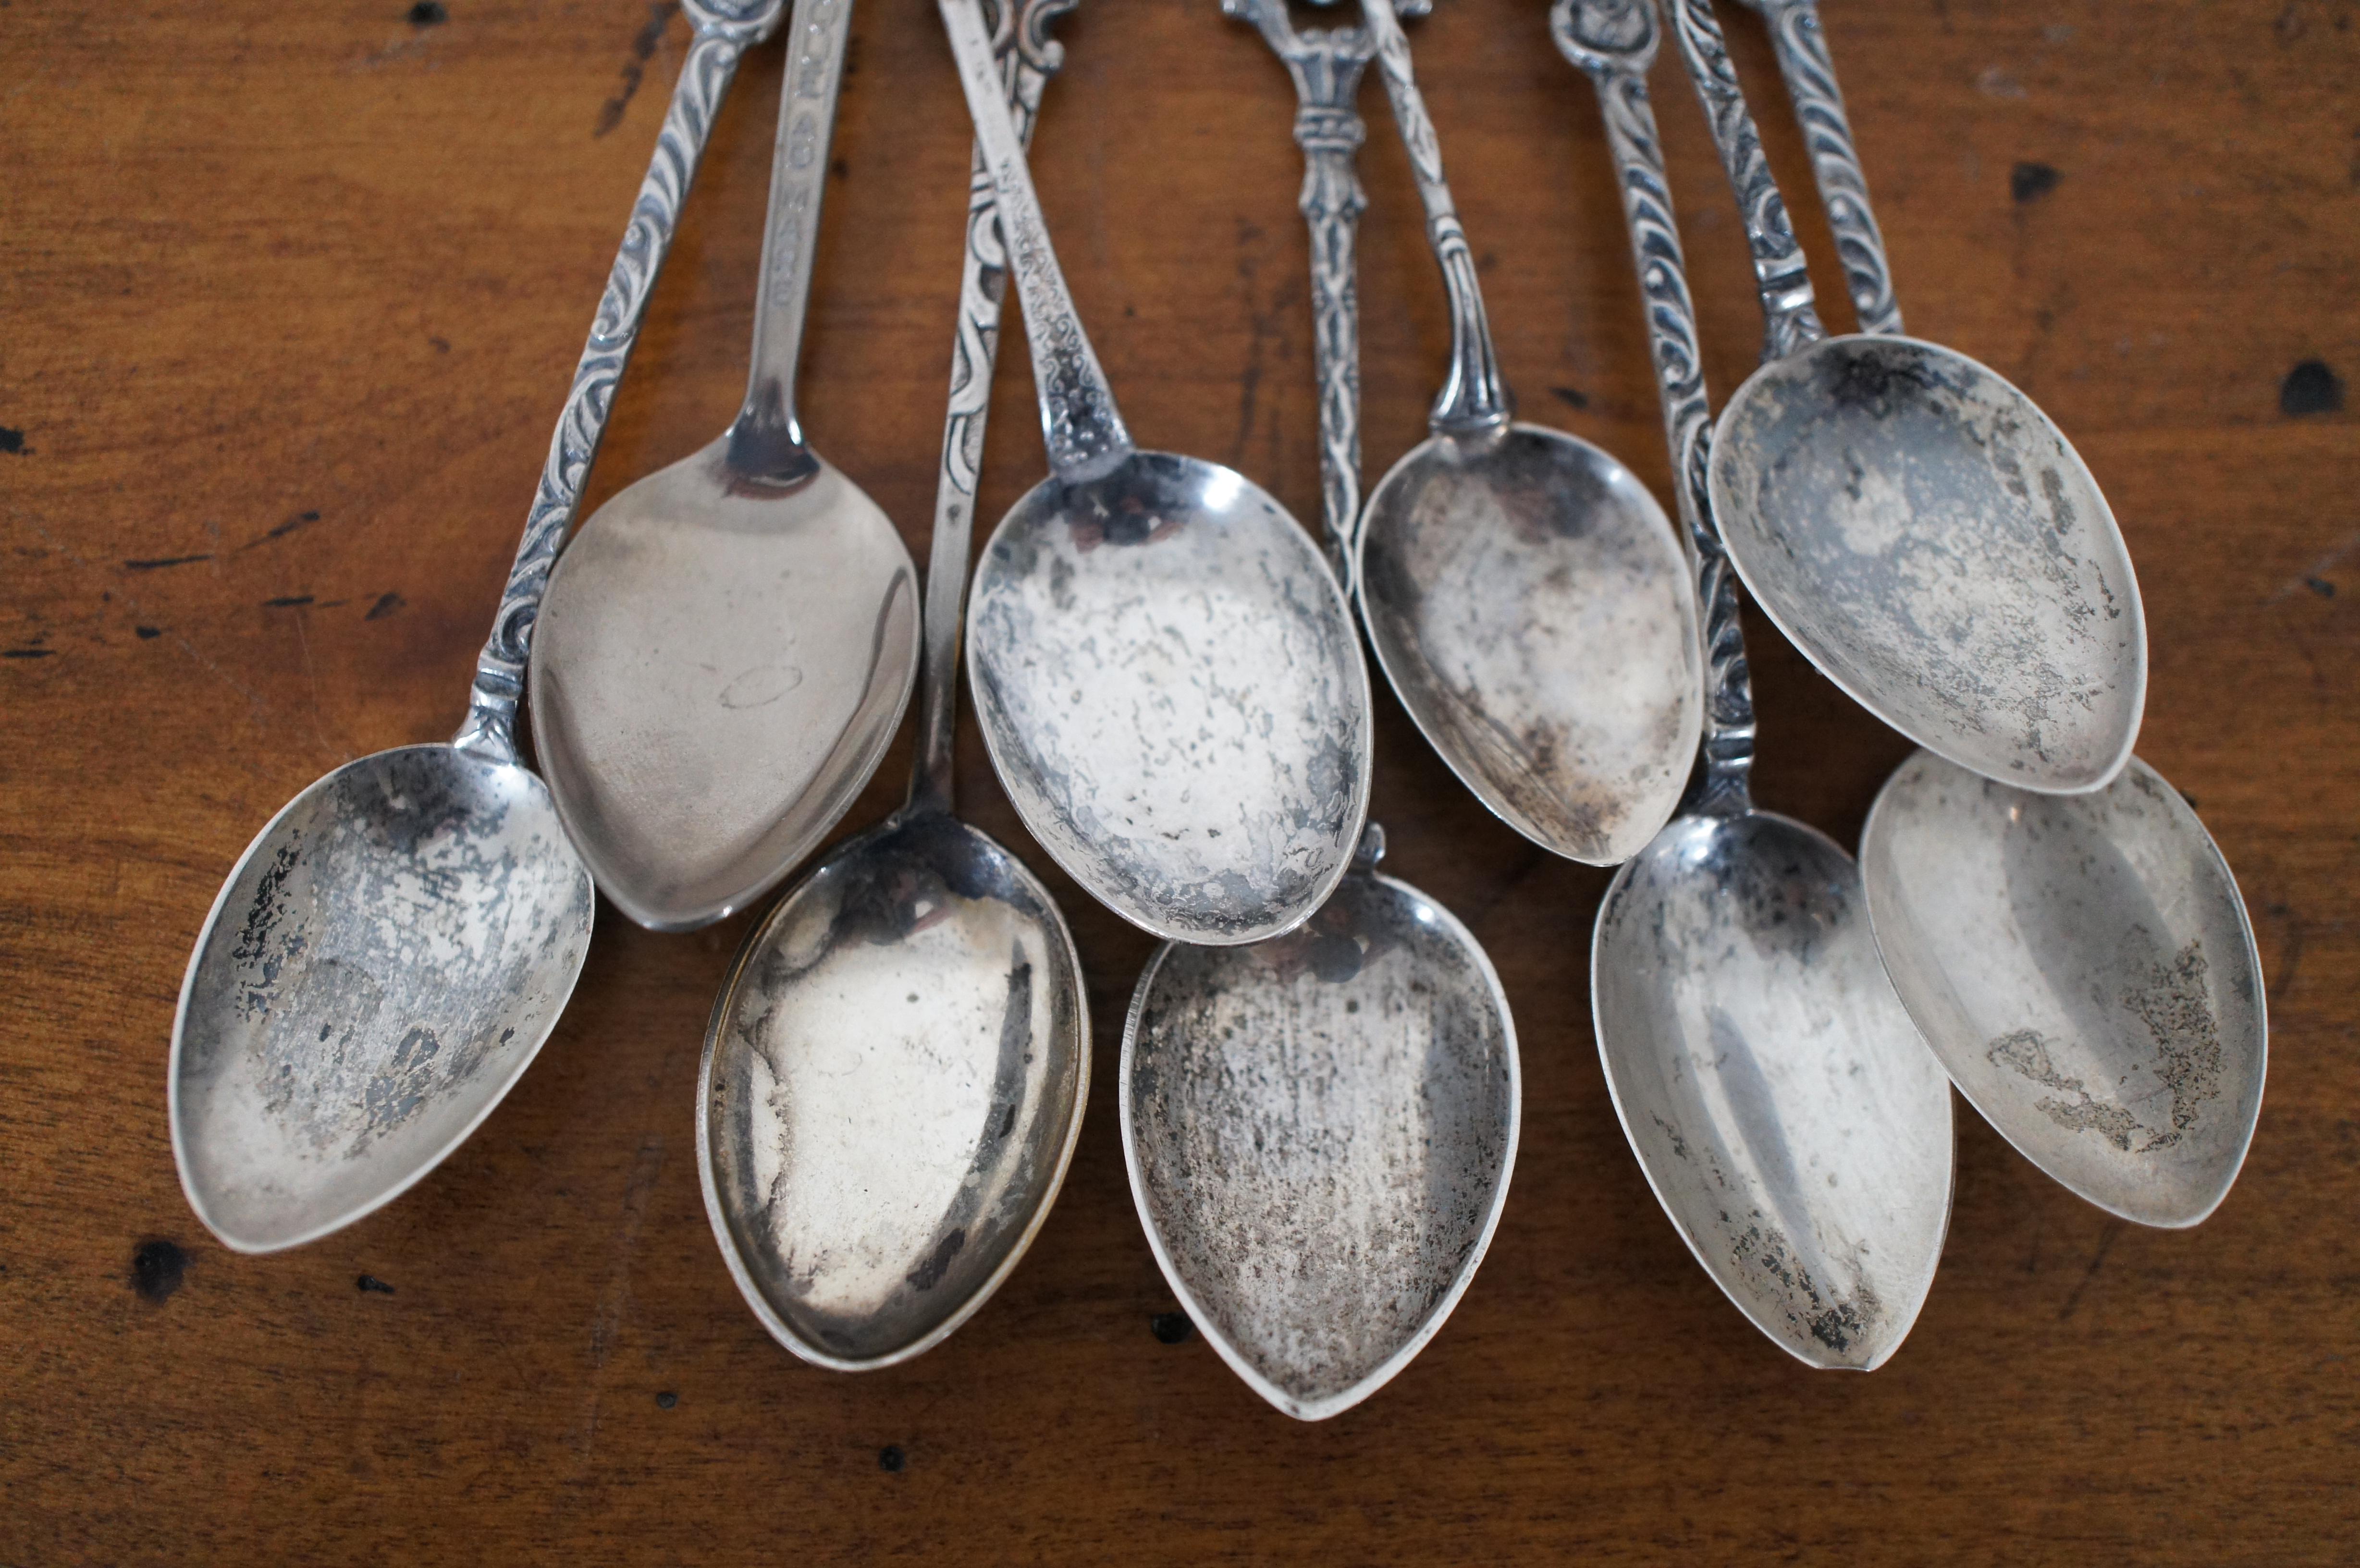 collector spoons from around the world